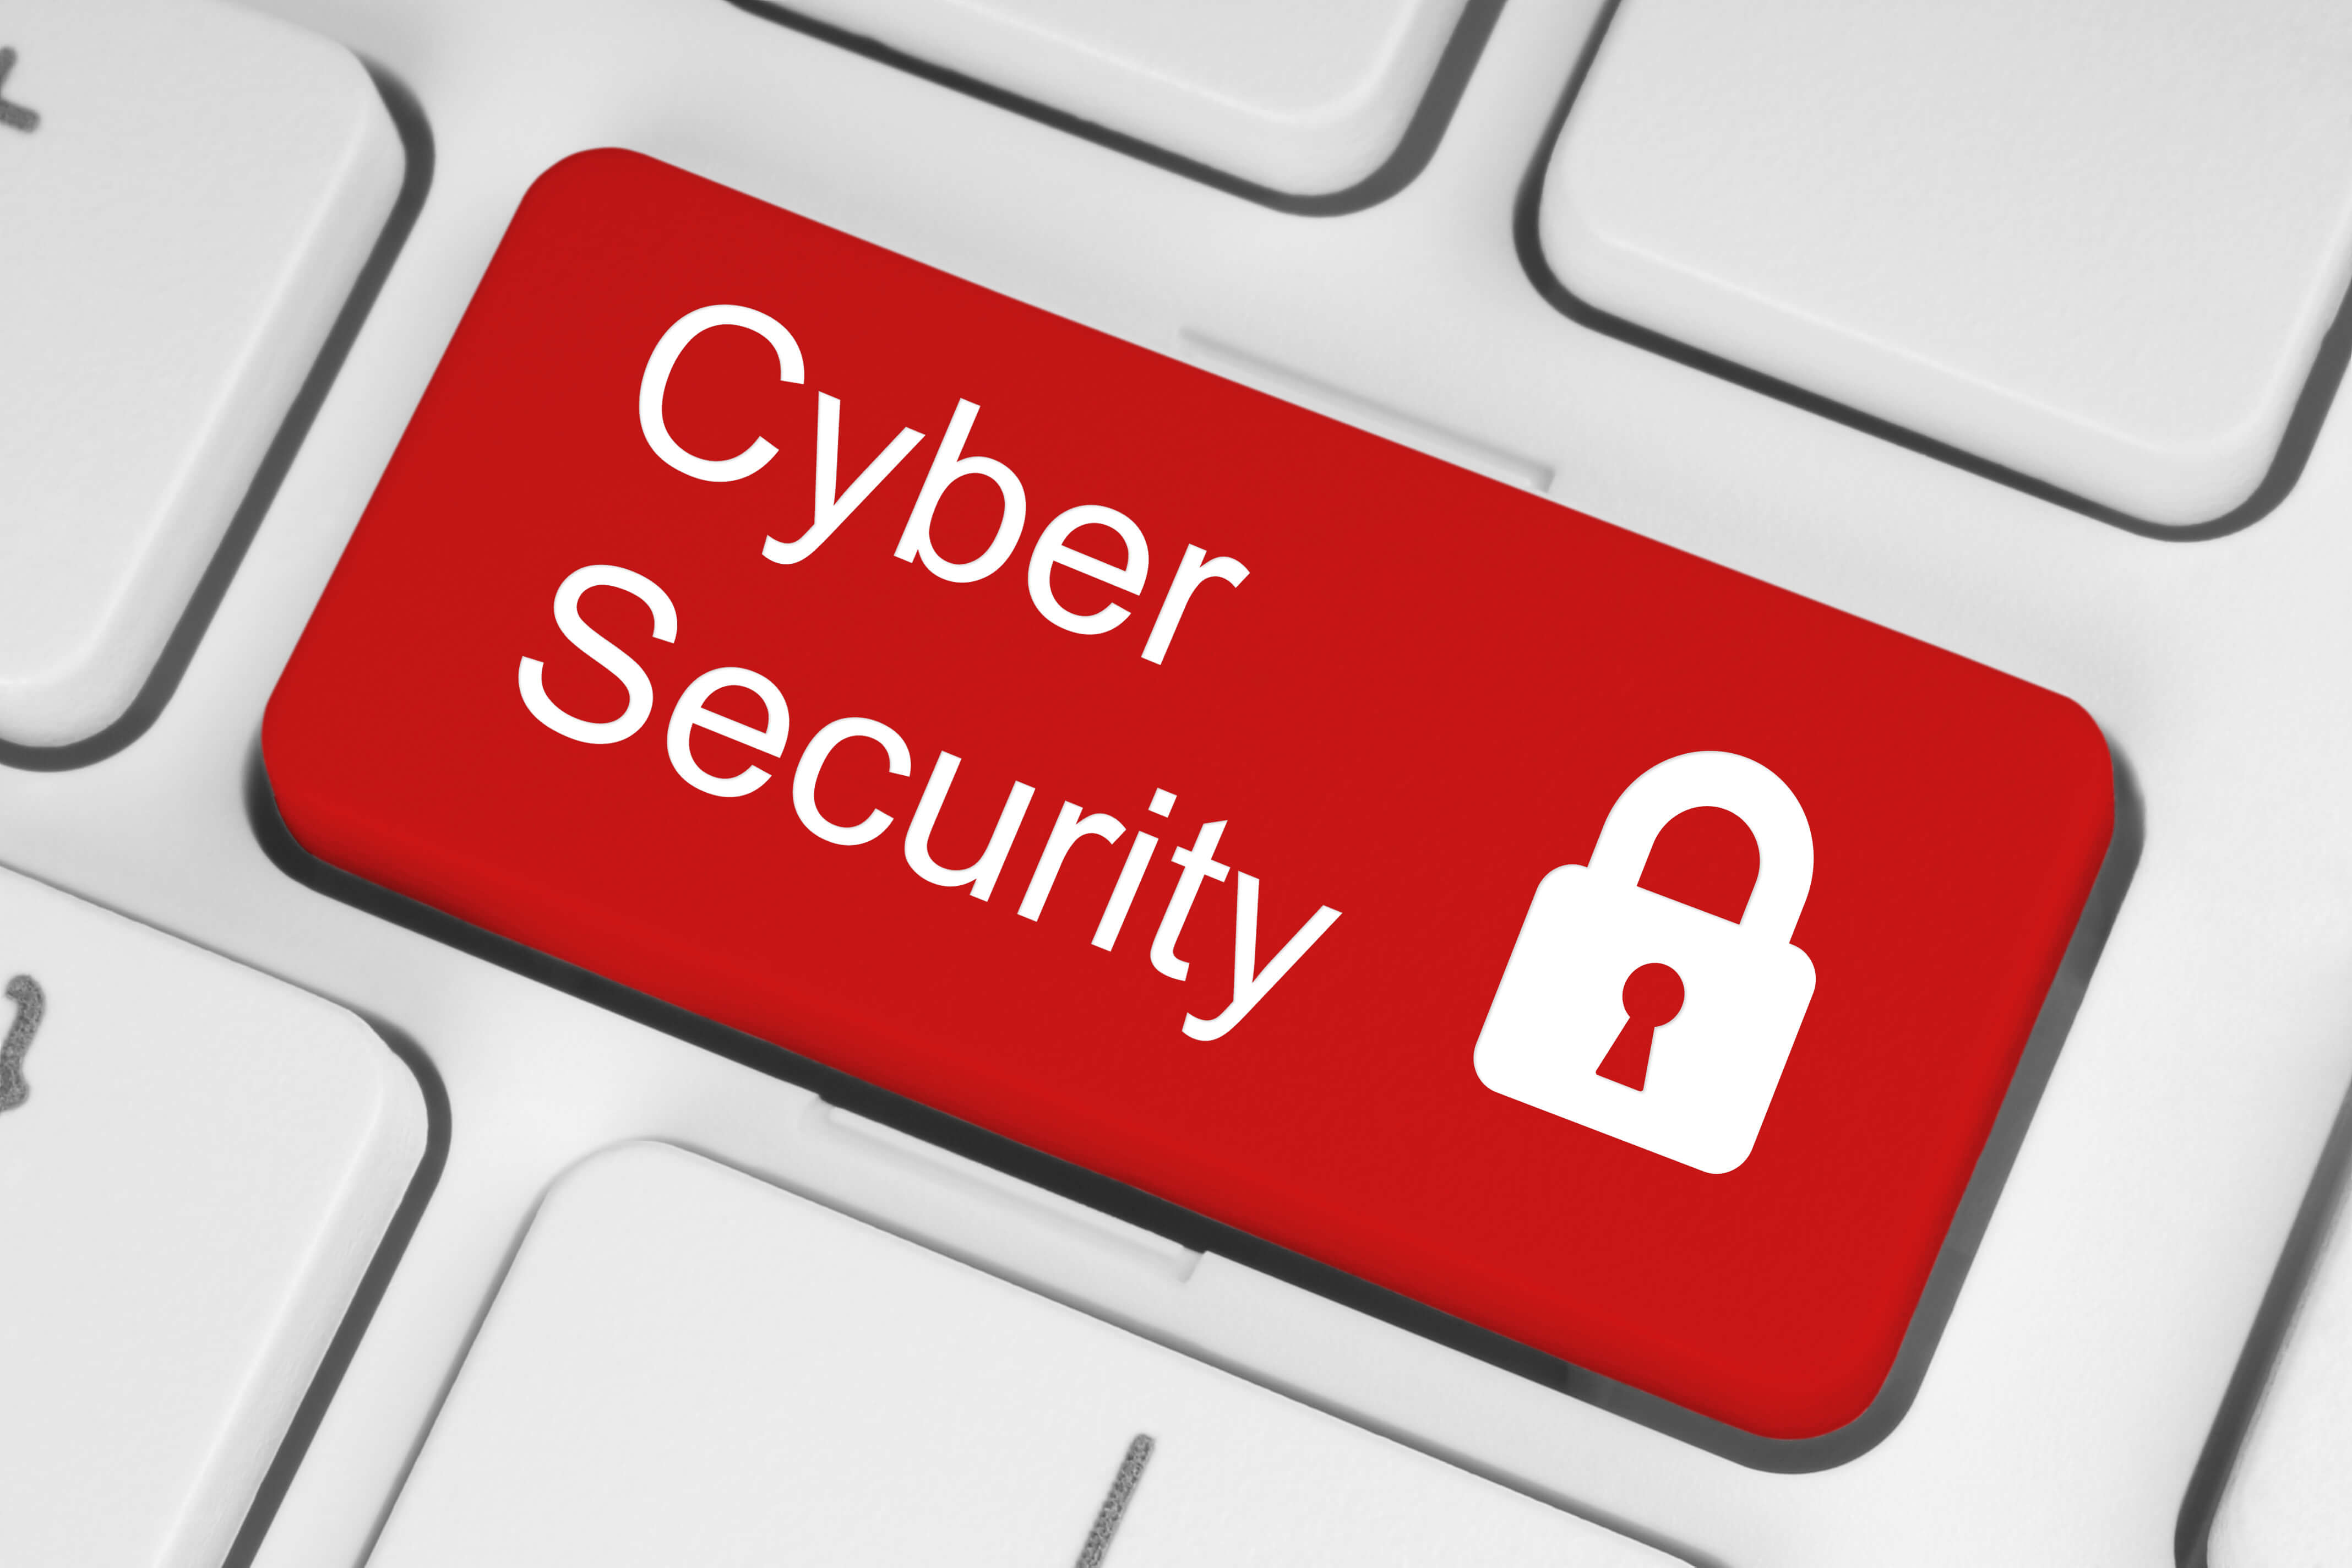 cyber security for small business